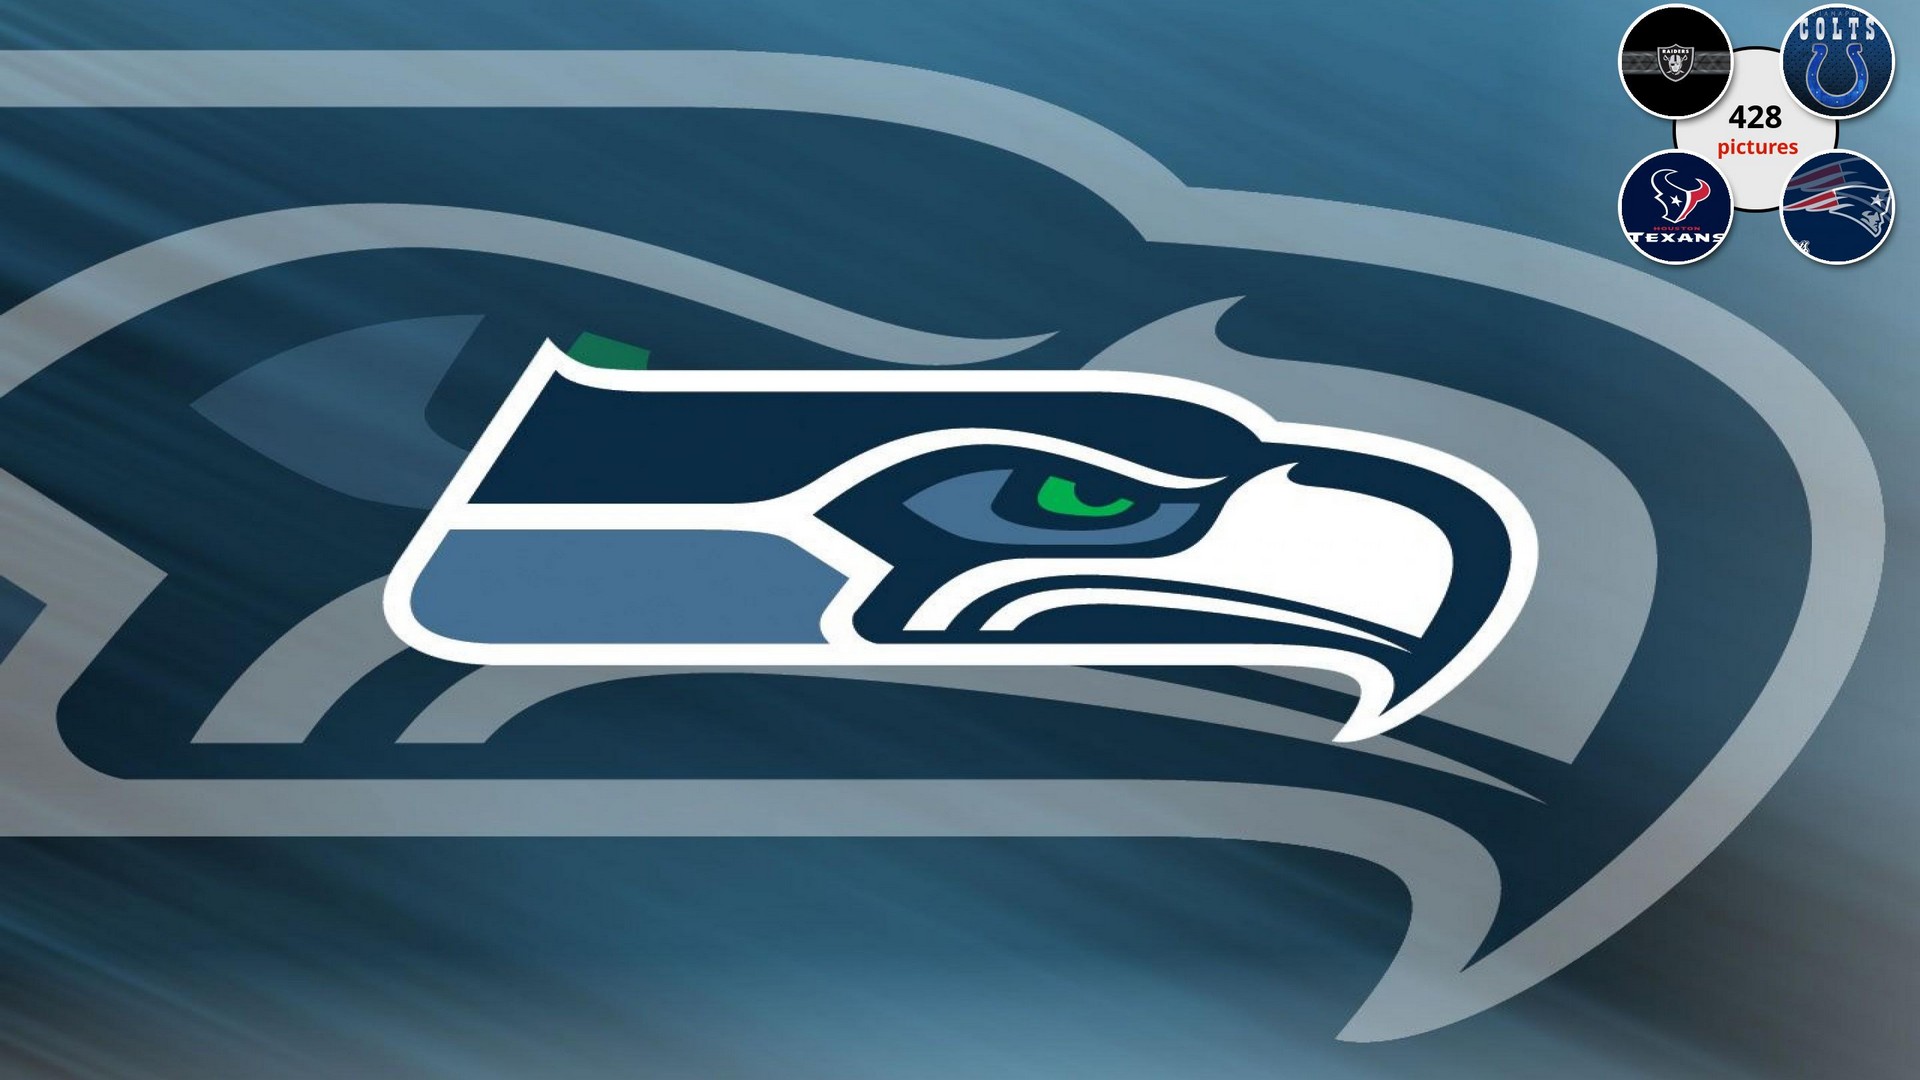 Wallpapers HD Seattle Seahawks With high-resolution 1920X1080 pixel. You can use this wallpaper for your Mac or Windows Desktop Background, iPhone, Android or Tablet and another Smartphone device